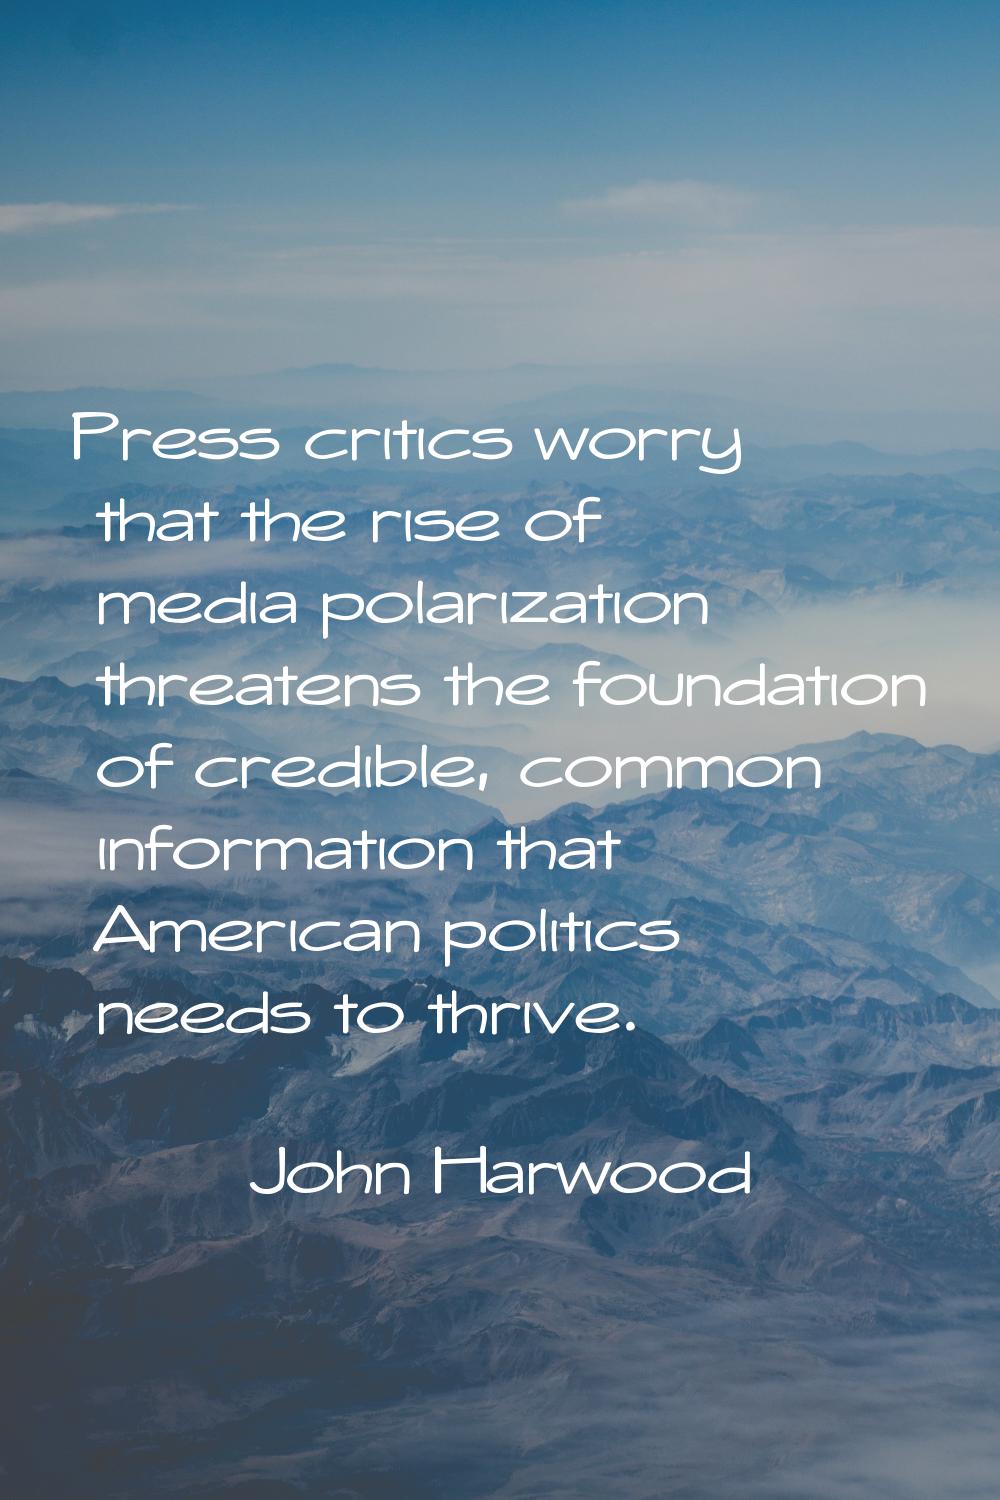 Press critics worry that the rise of media polarization threatens the foundation of credible, commo